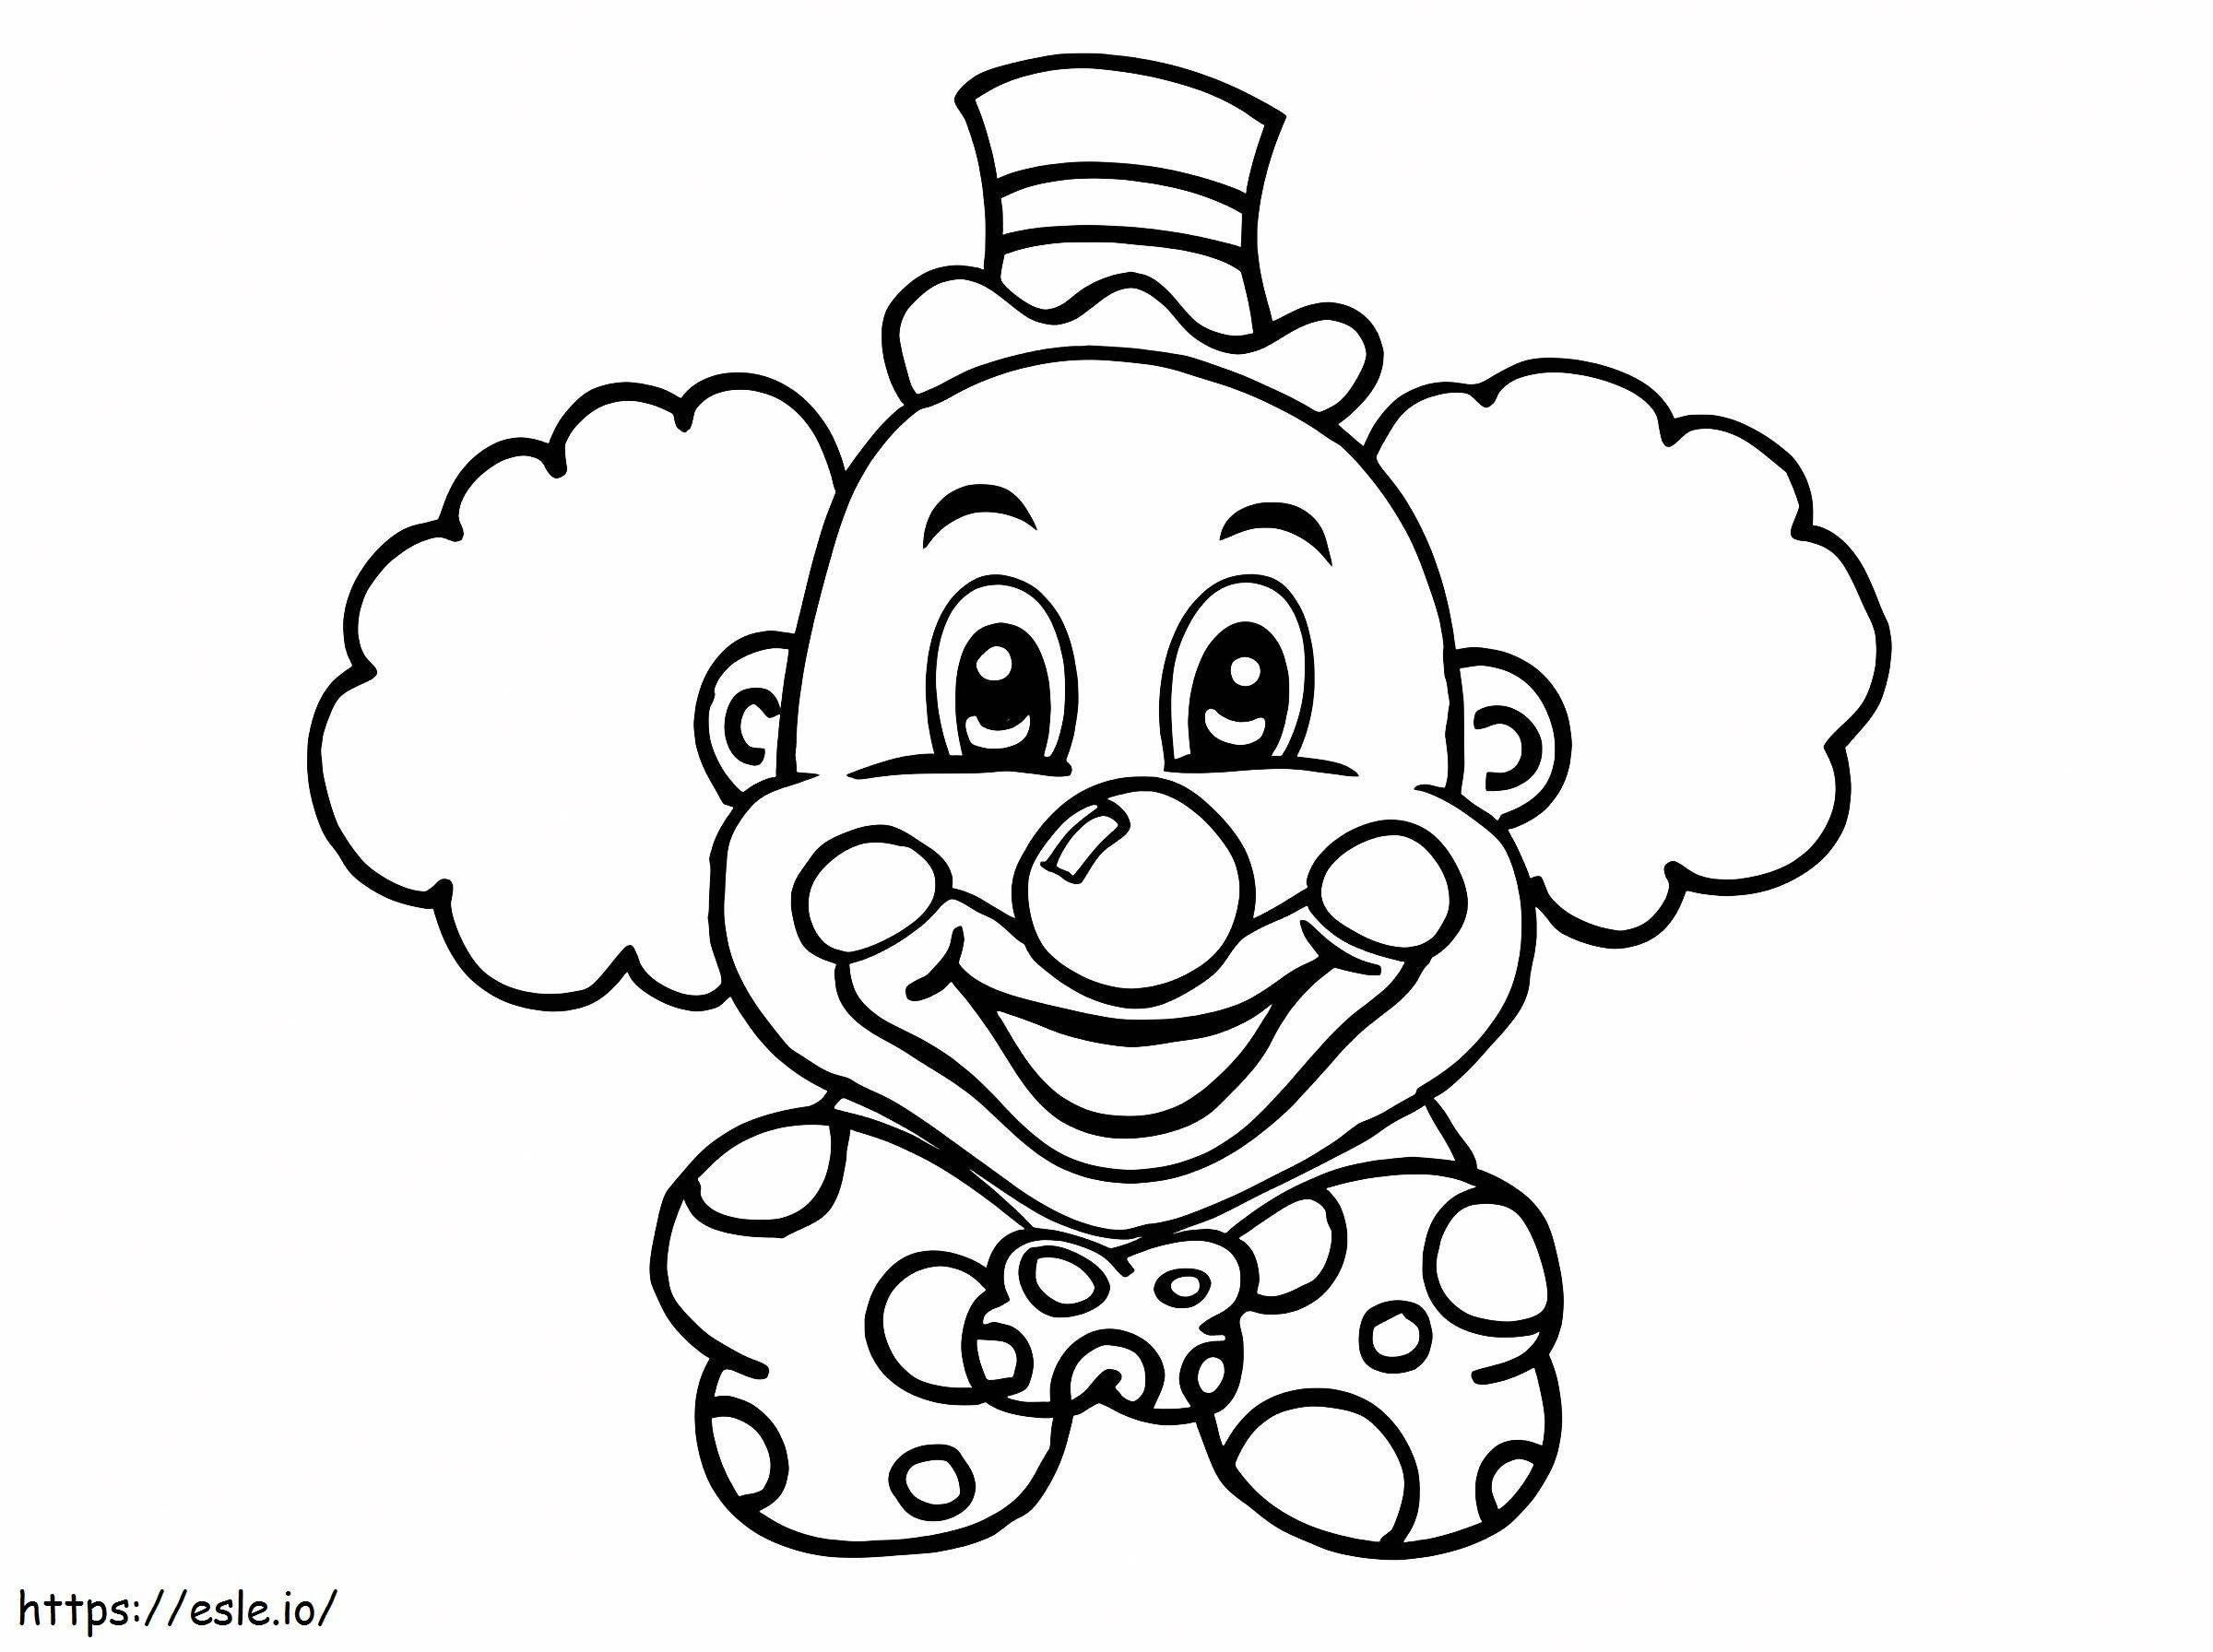 Clown Head coloring page